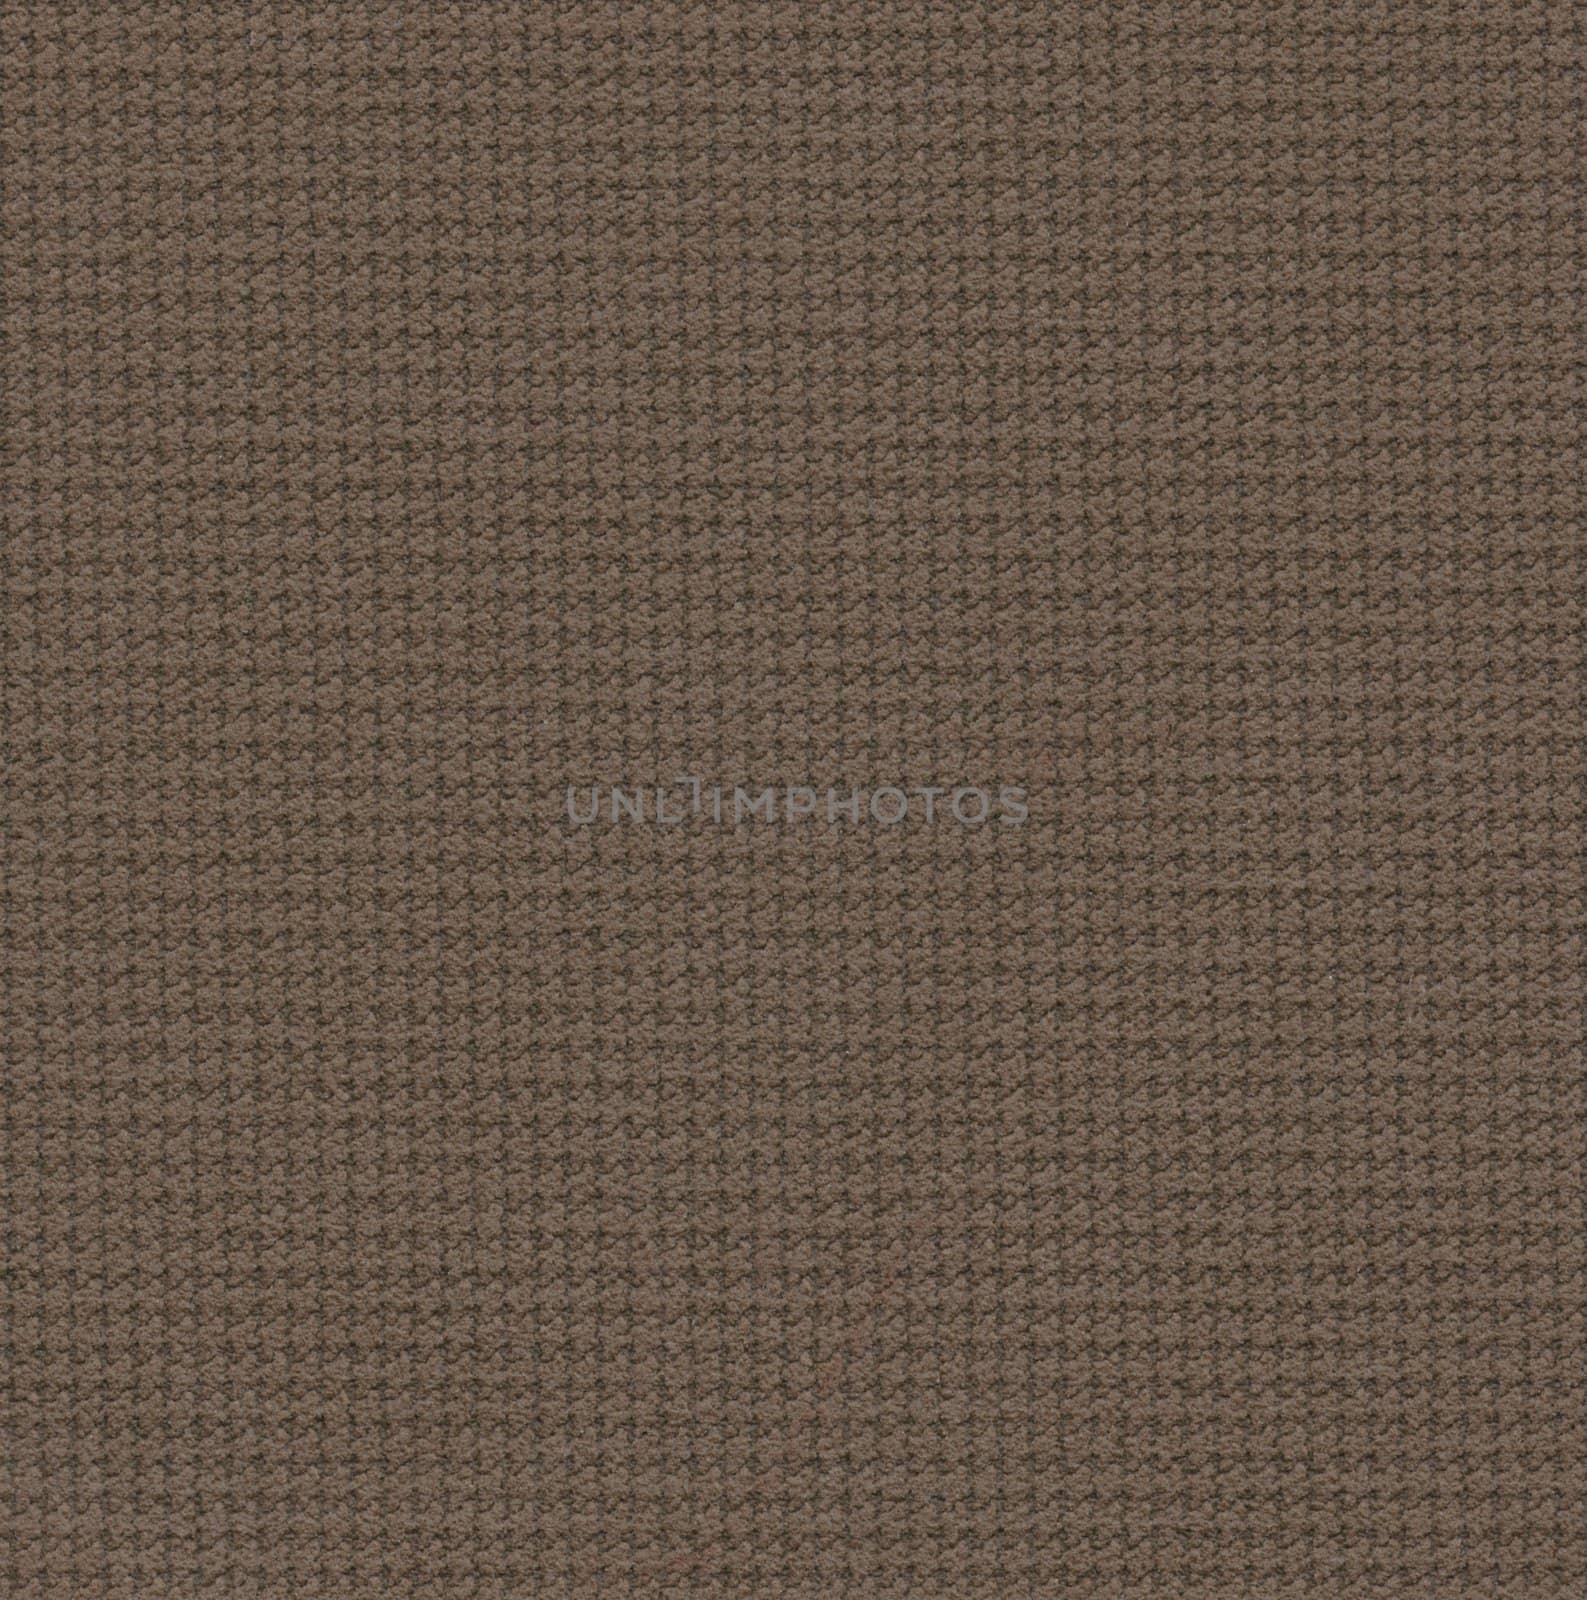 Dark Brown fabric texture background by mg1408